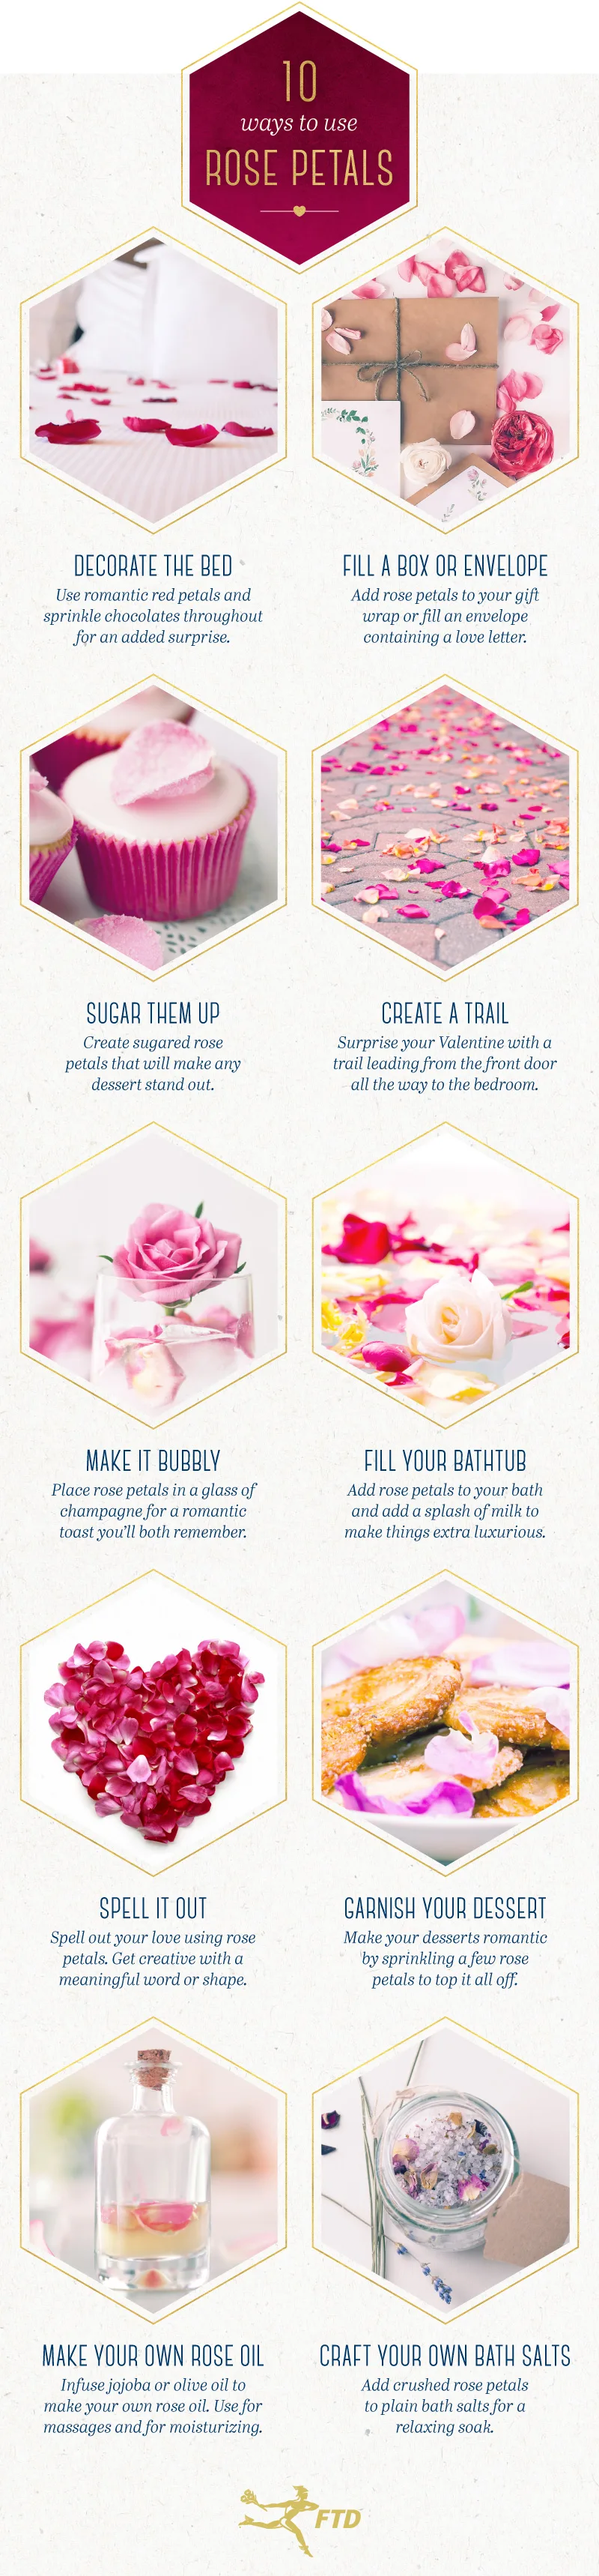 23 Romantic Ways to Use Rose Petals for Valentine’s Day